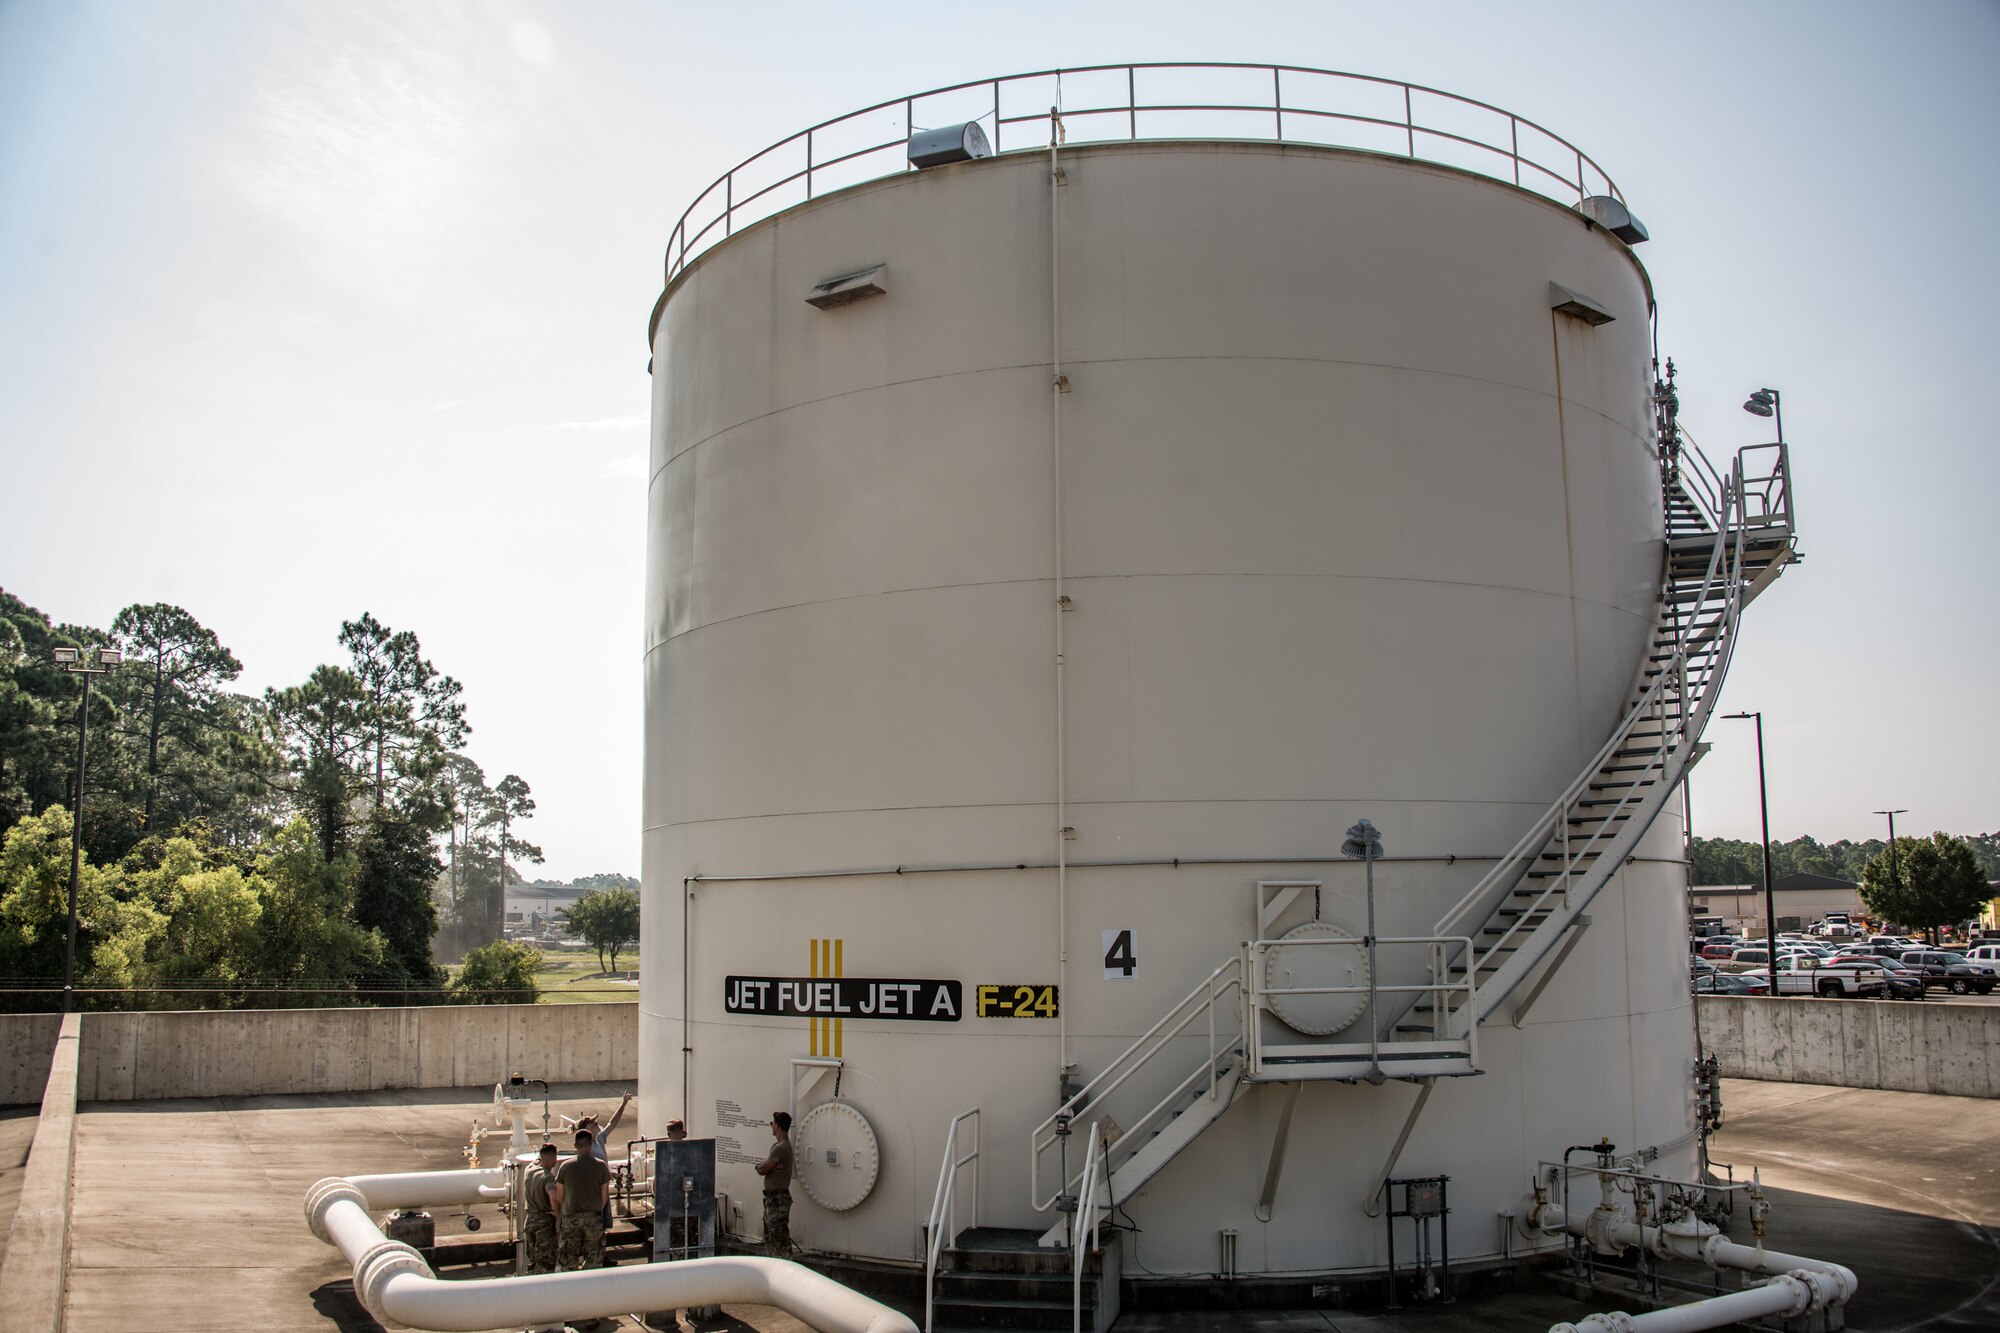 Five men tour the exterior of an above ground fuel storage tank